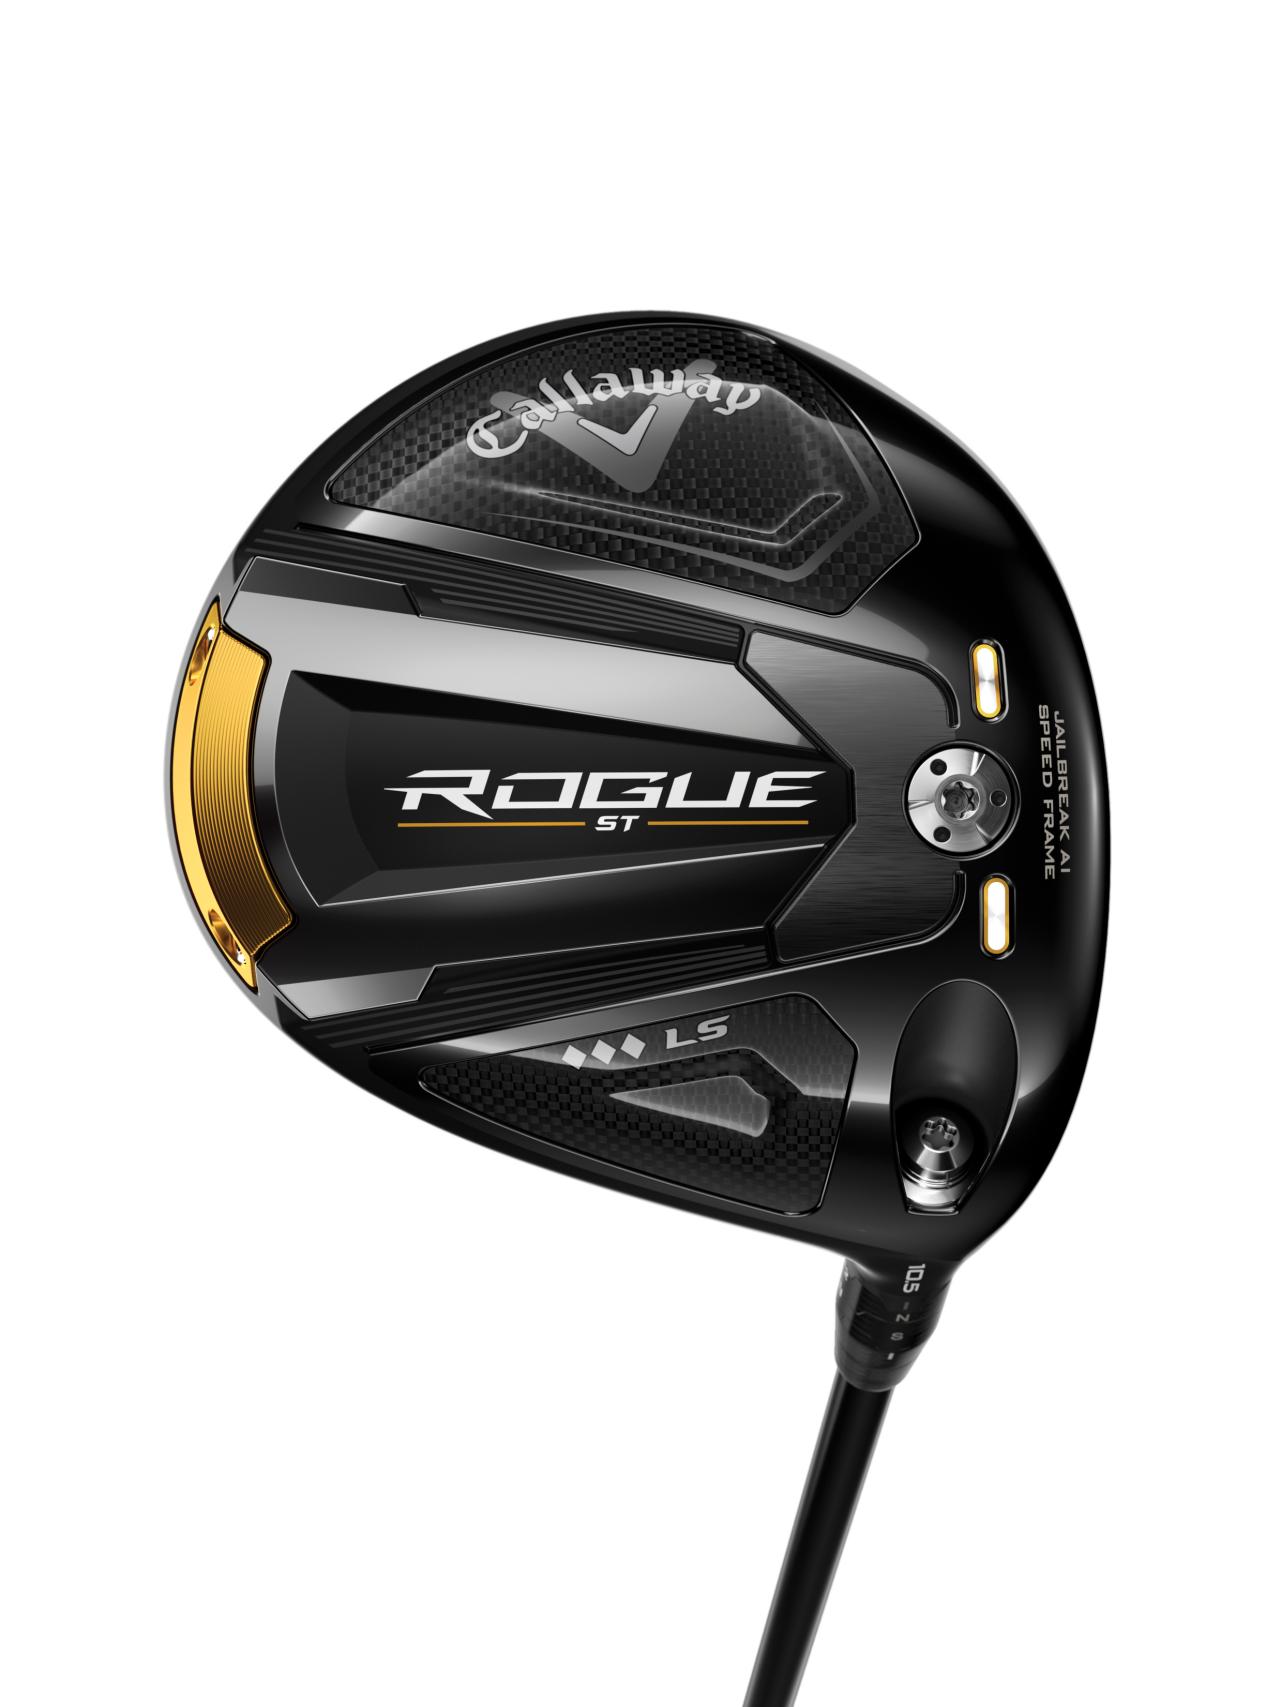 Callaway Rogue ST drivers: What you need to know | Golf Equipment: Clubs,  Balls, Bags | Golf Digest